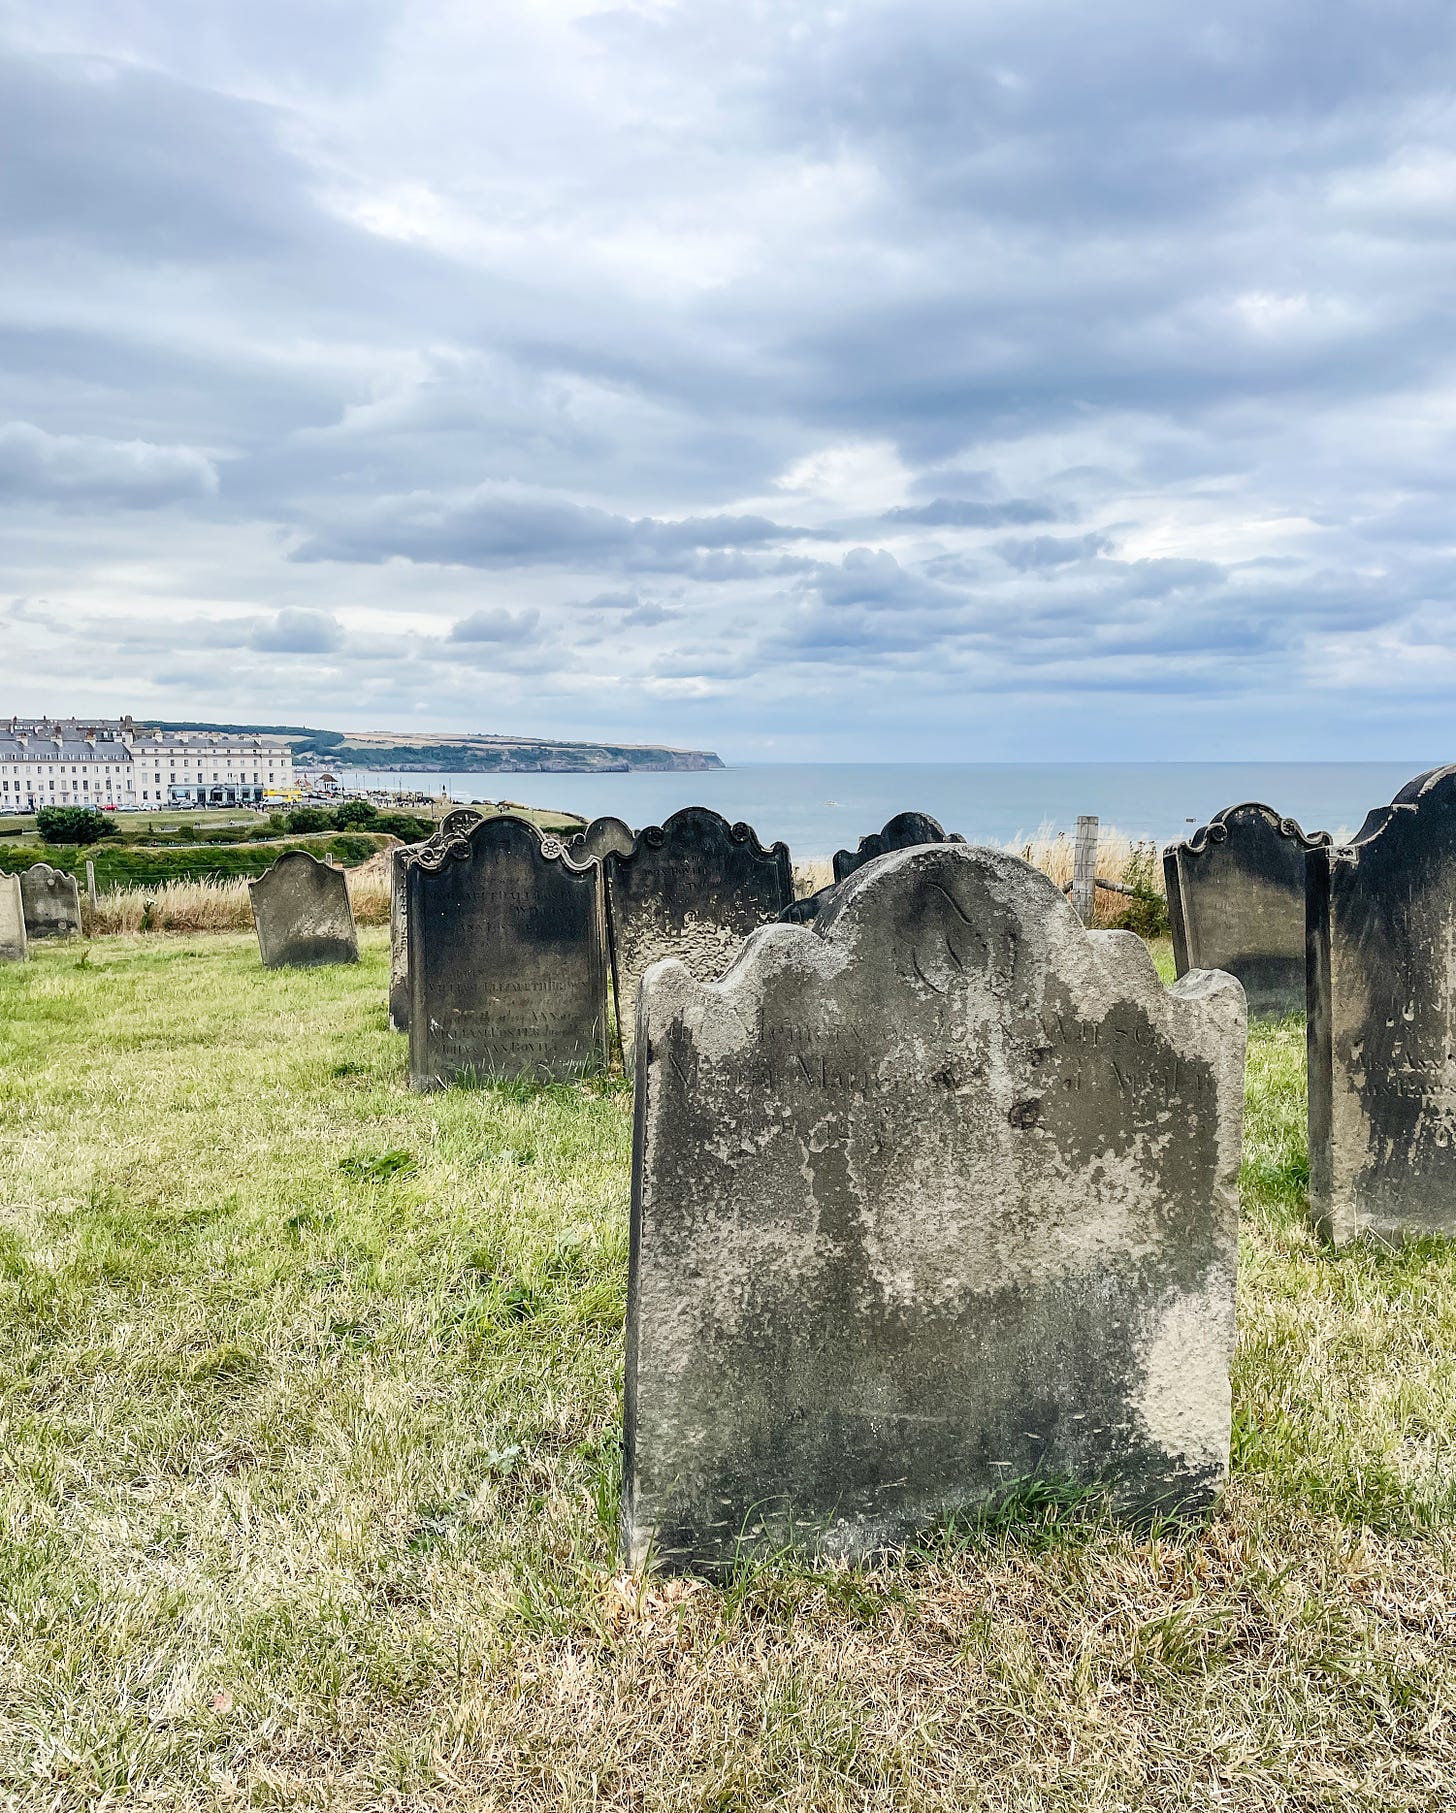 The cemetary at Whitby, England